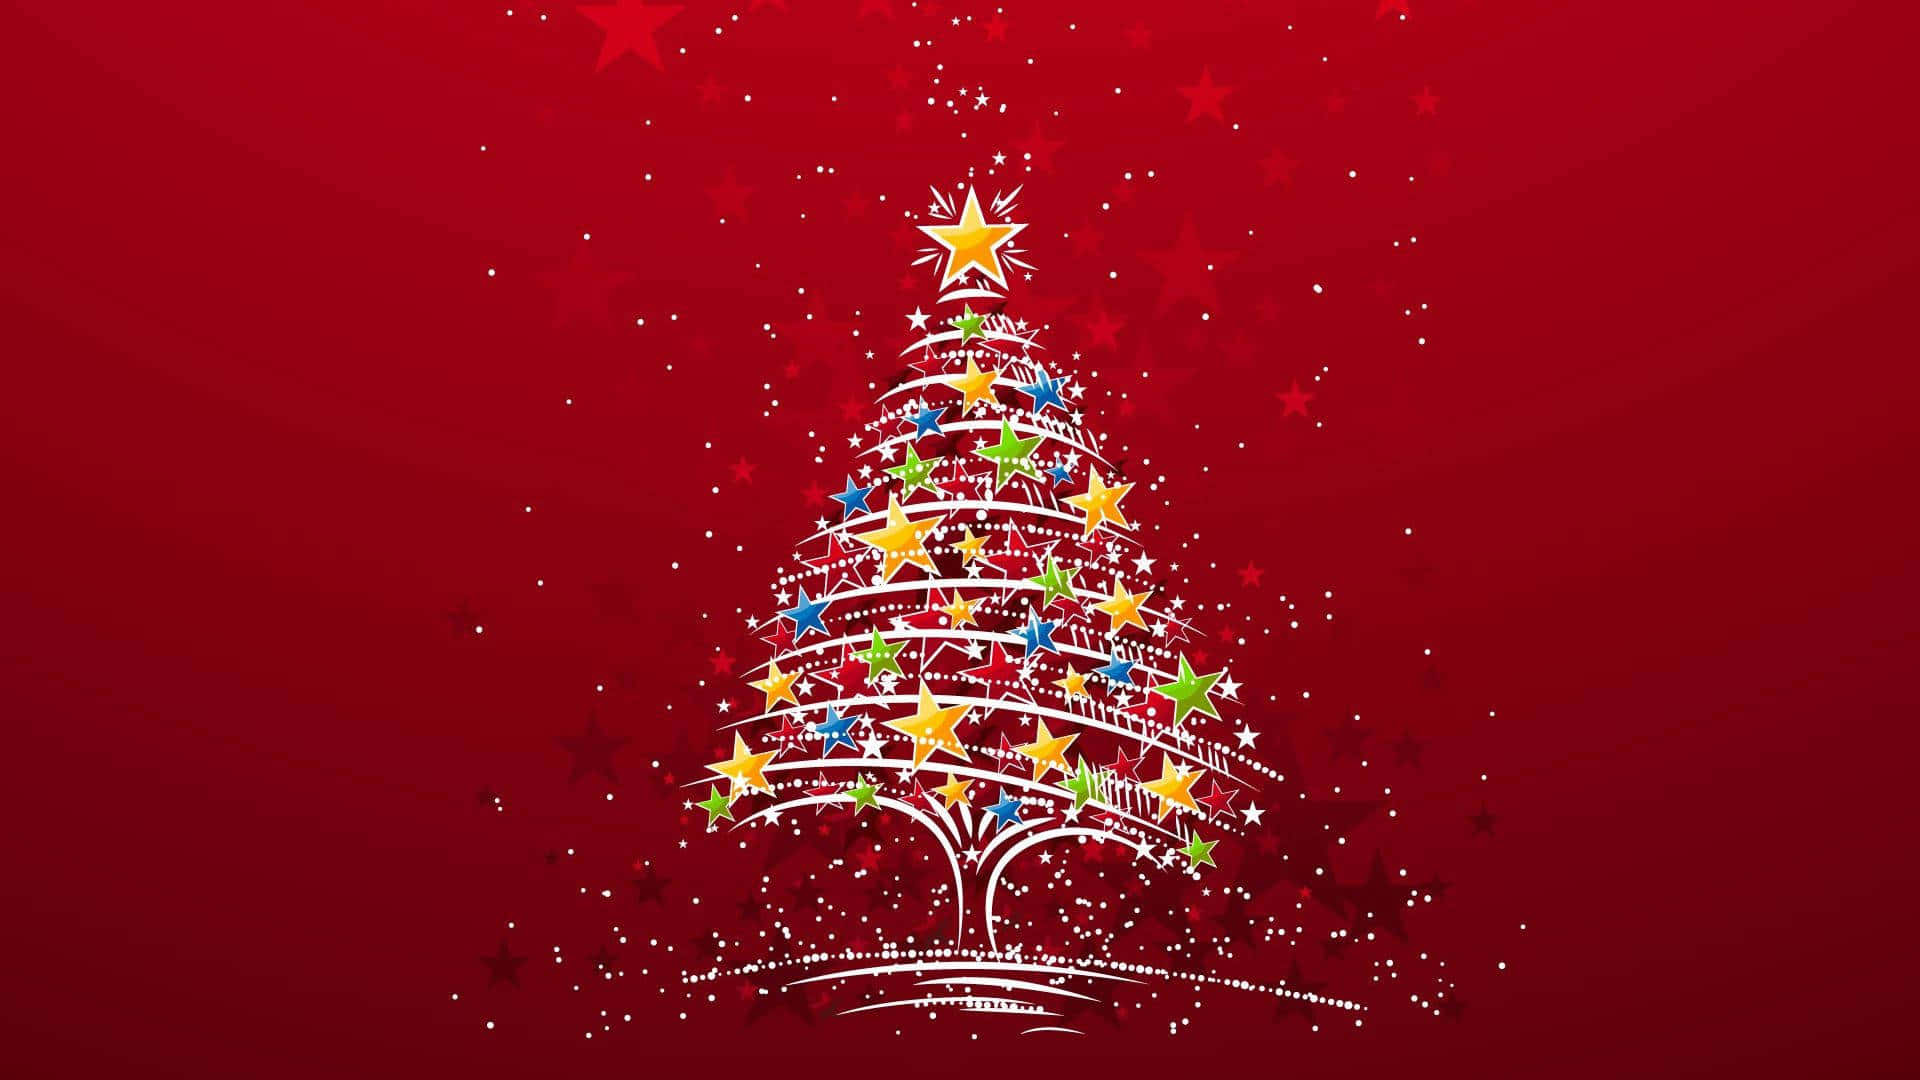 "Merry Christmas from this adorable tree!" Wallpaper